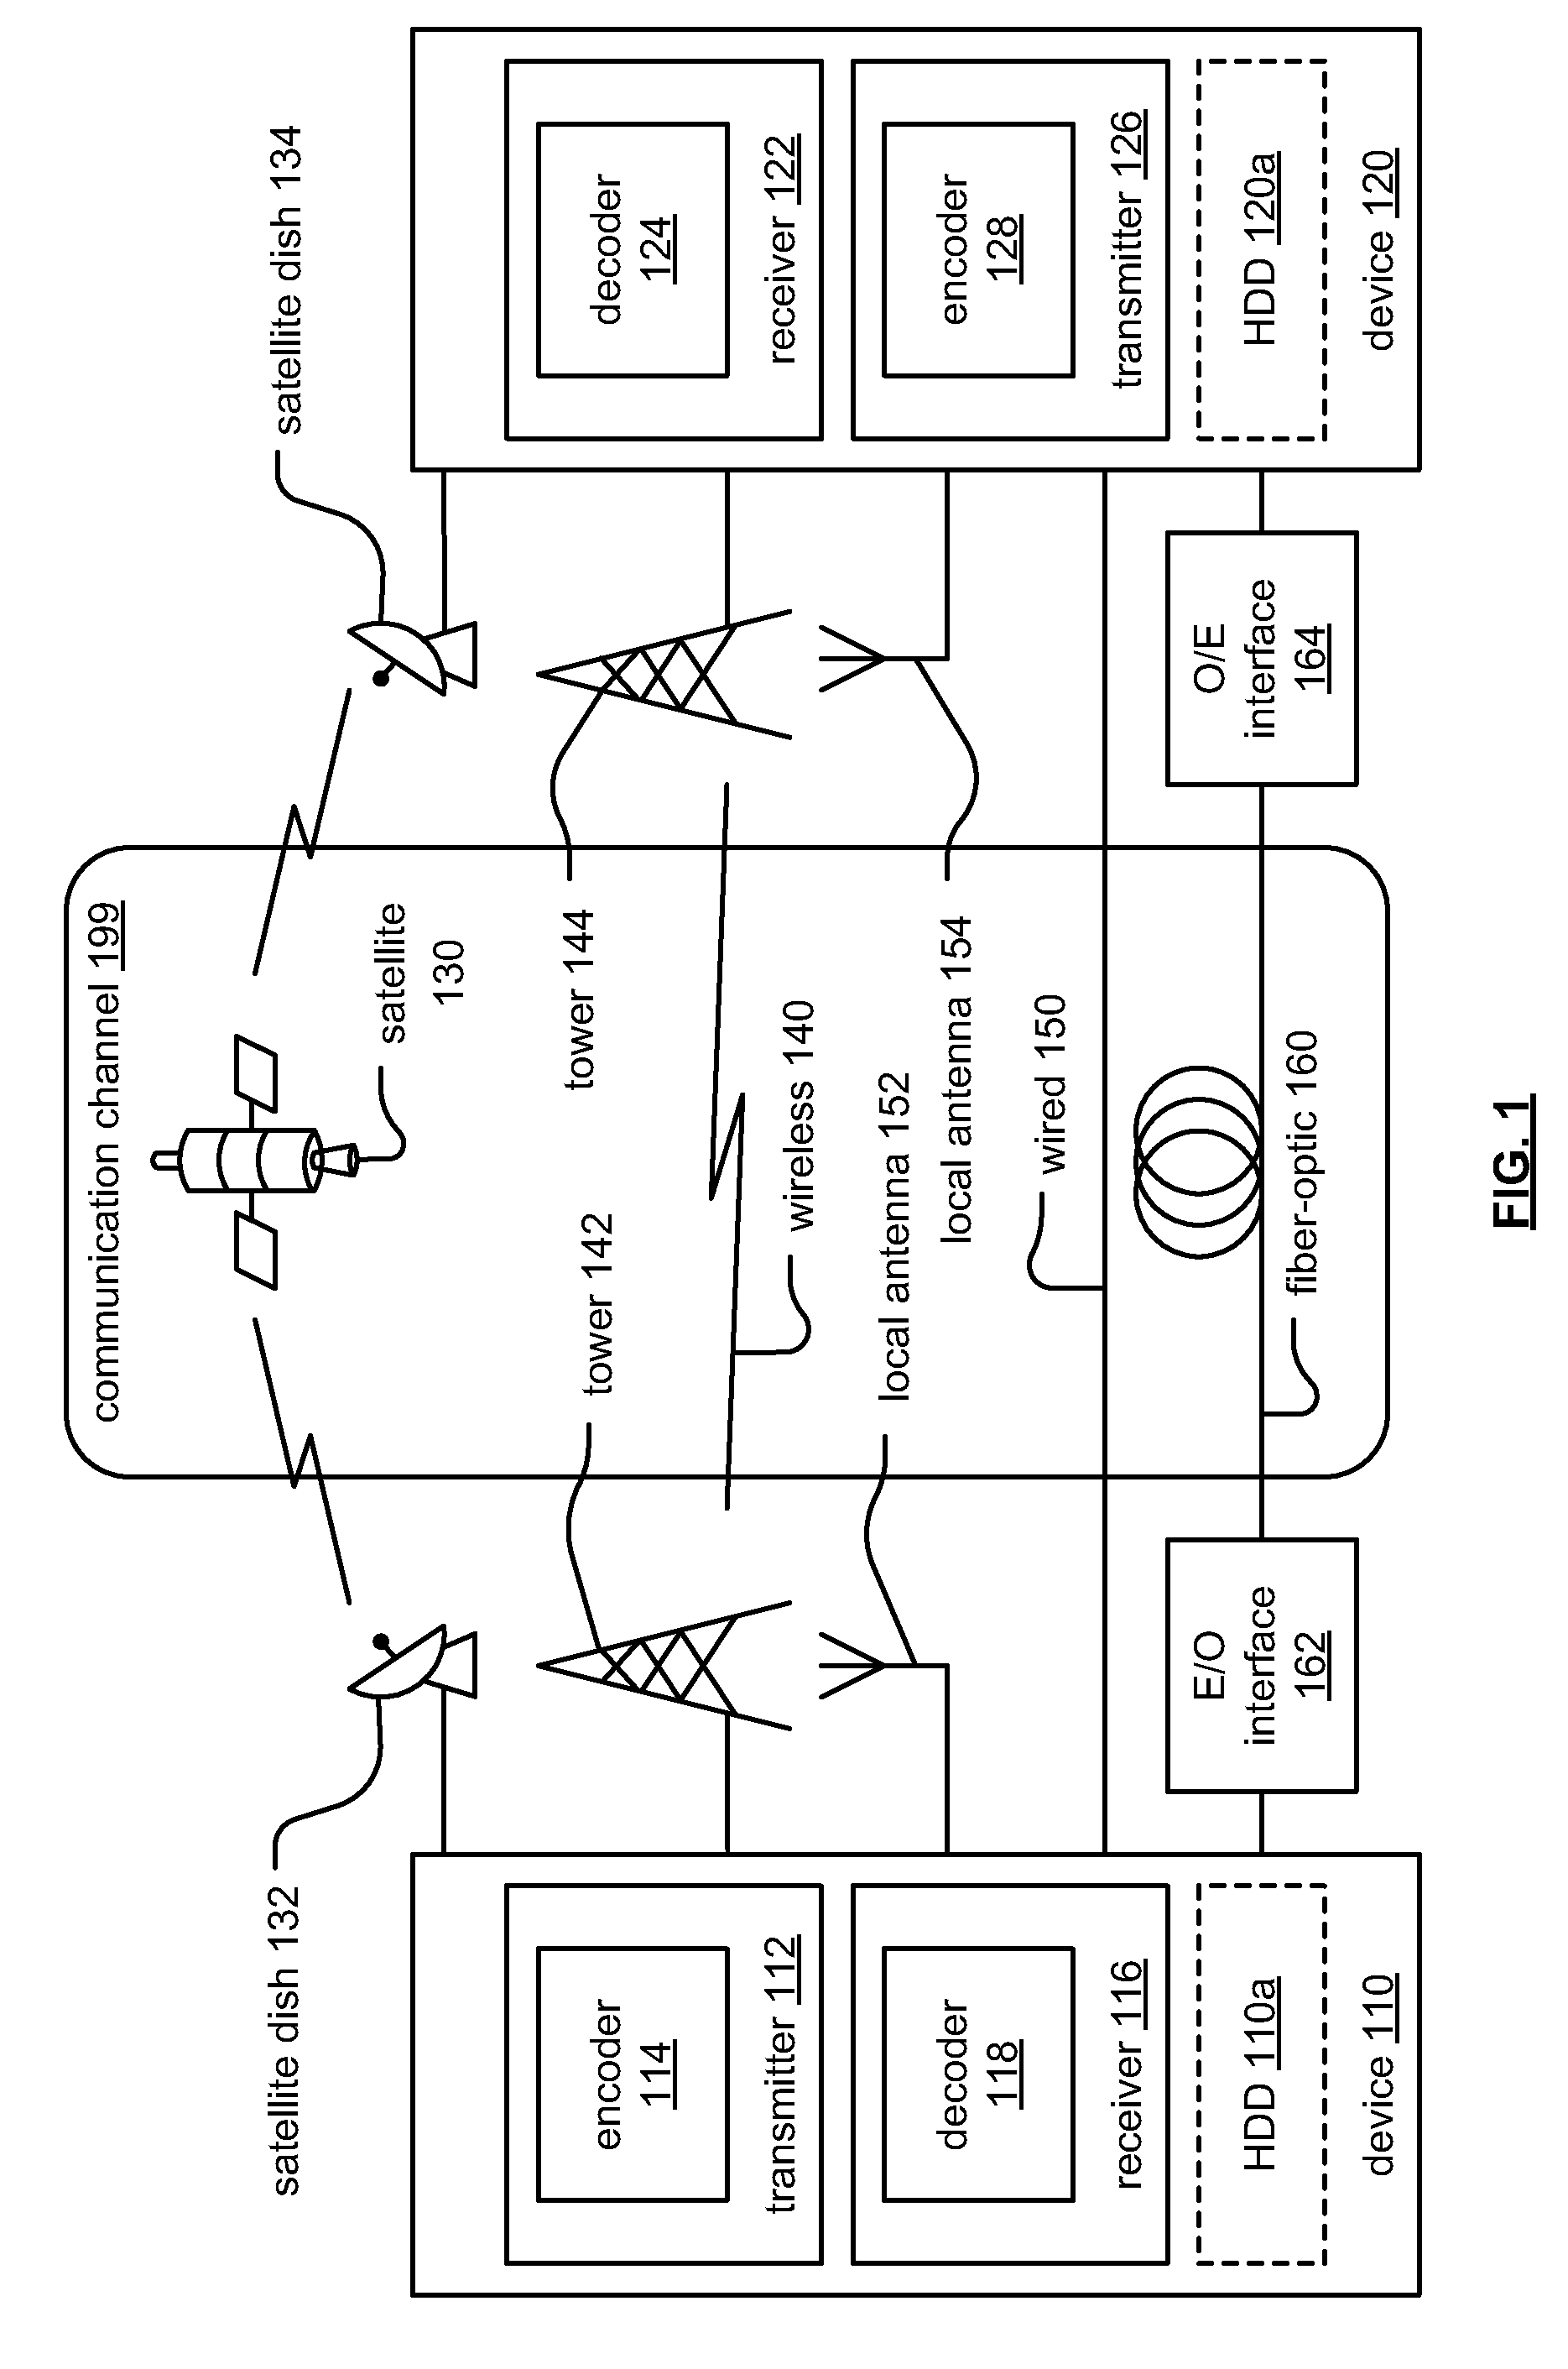 Imbalance and distortion cancellation for composite analog to digital converter (ADC)